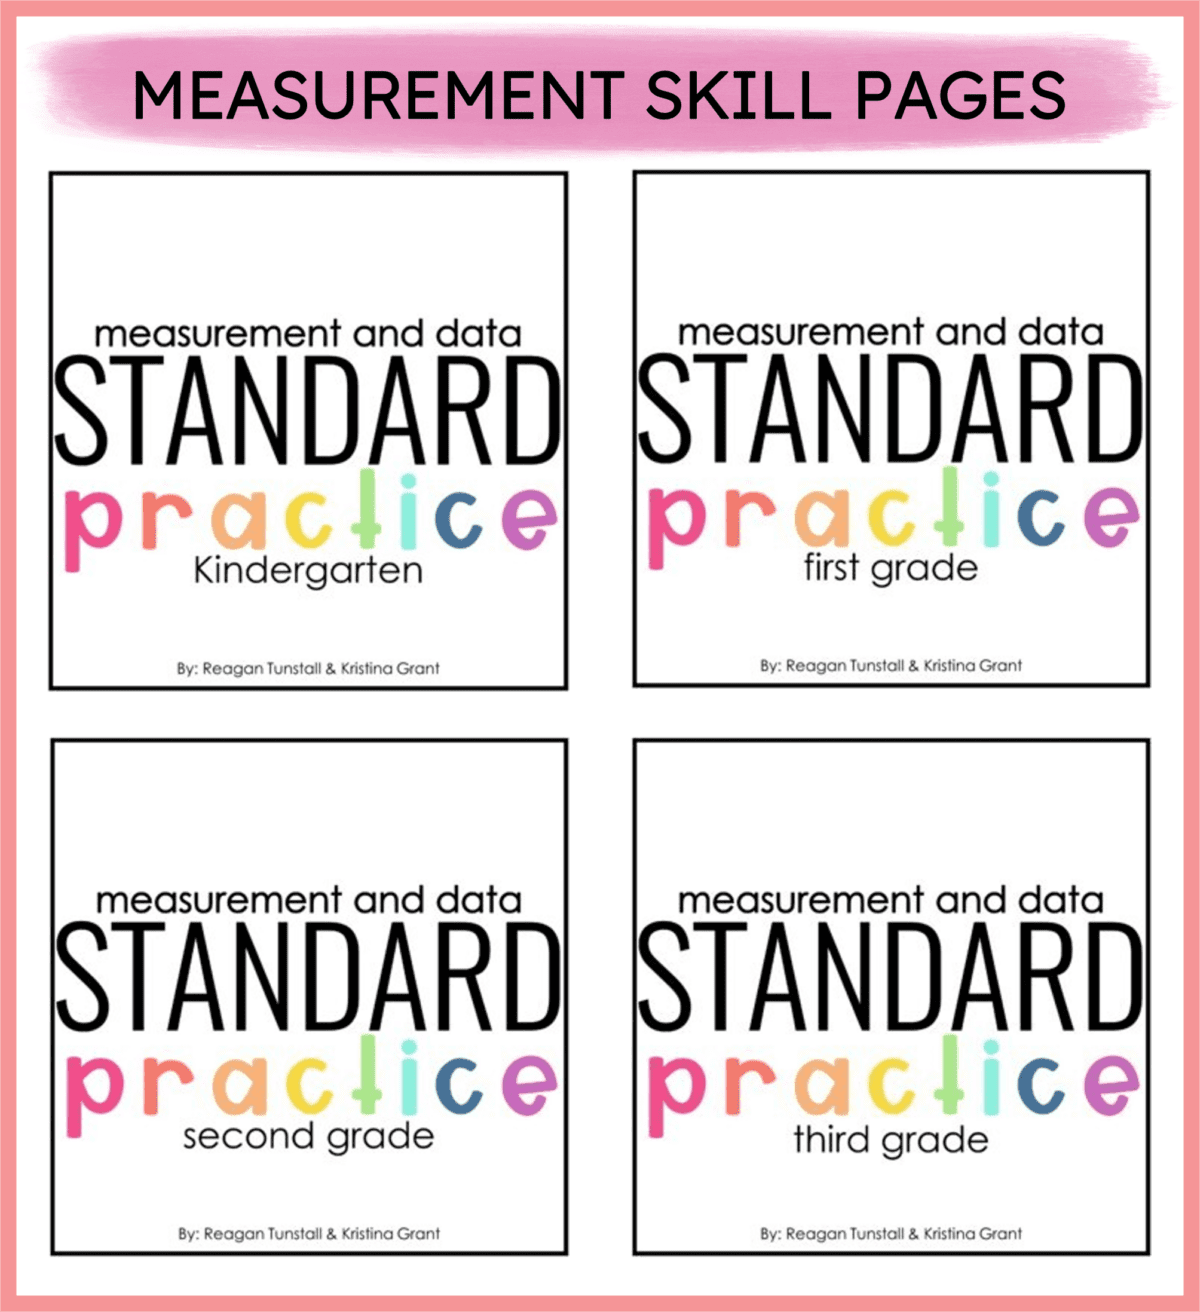 A group of four math resource covers named standard practice for grades kinder, first, second, and third to support measurement lessons in K-5. 